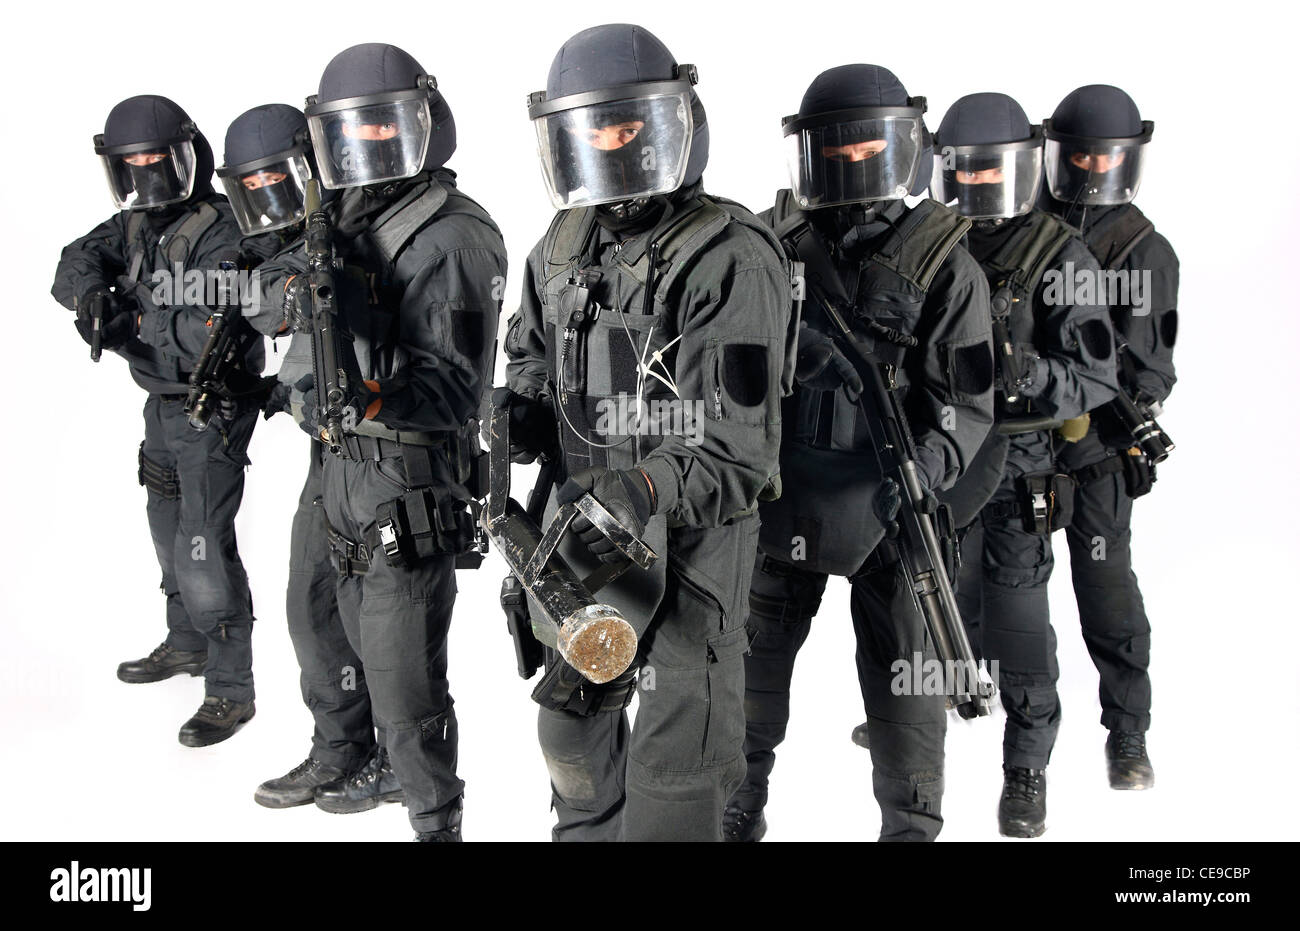 police-swat-team-police-special-operations-unit-fights-against-serious-CE9CBP.jpg